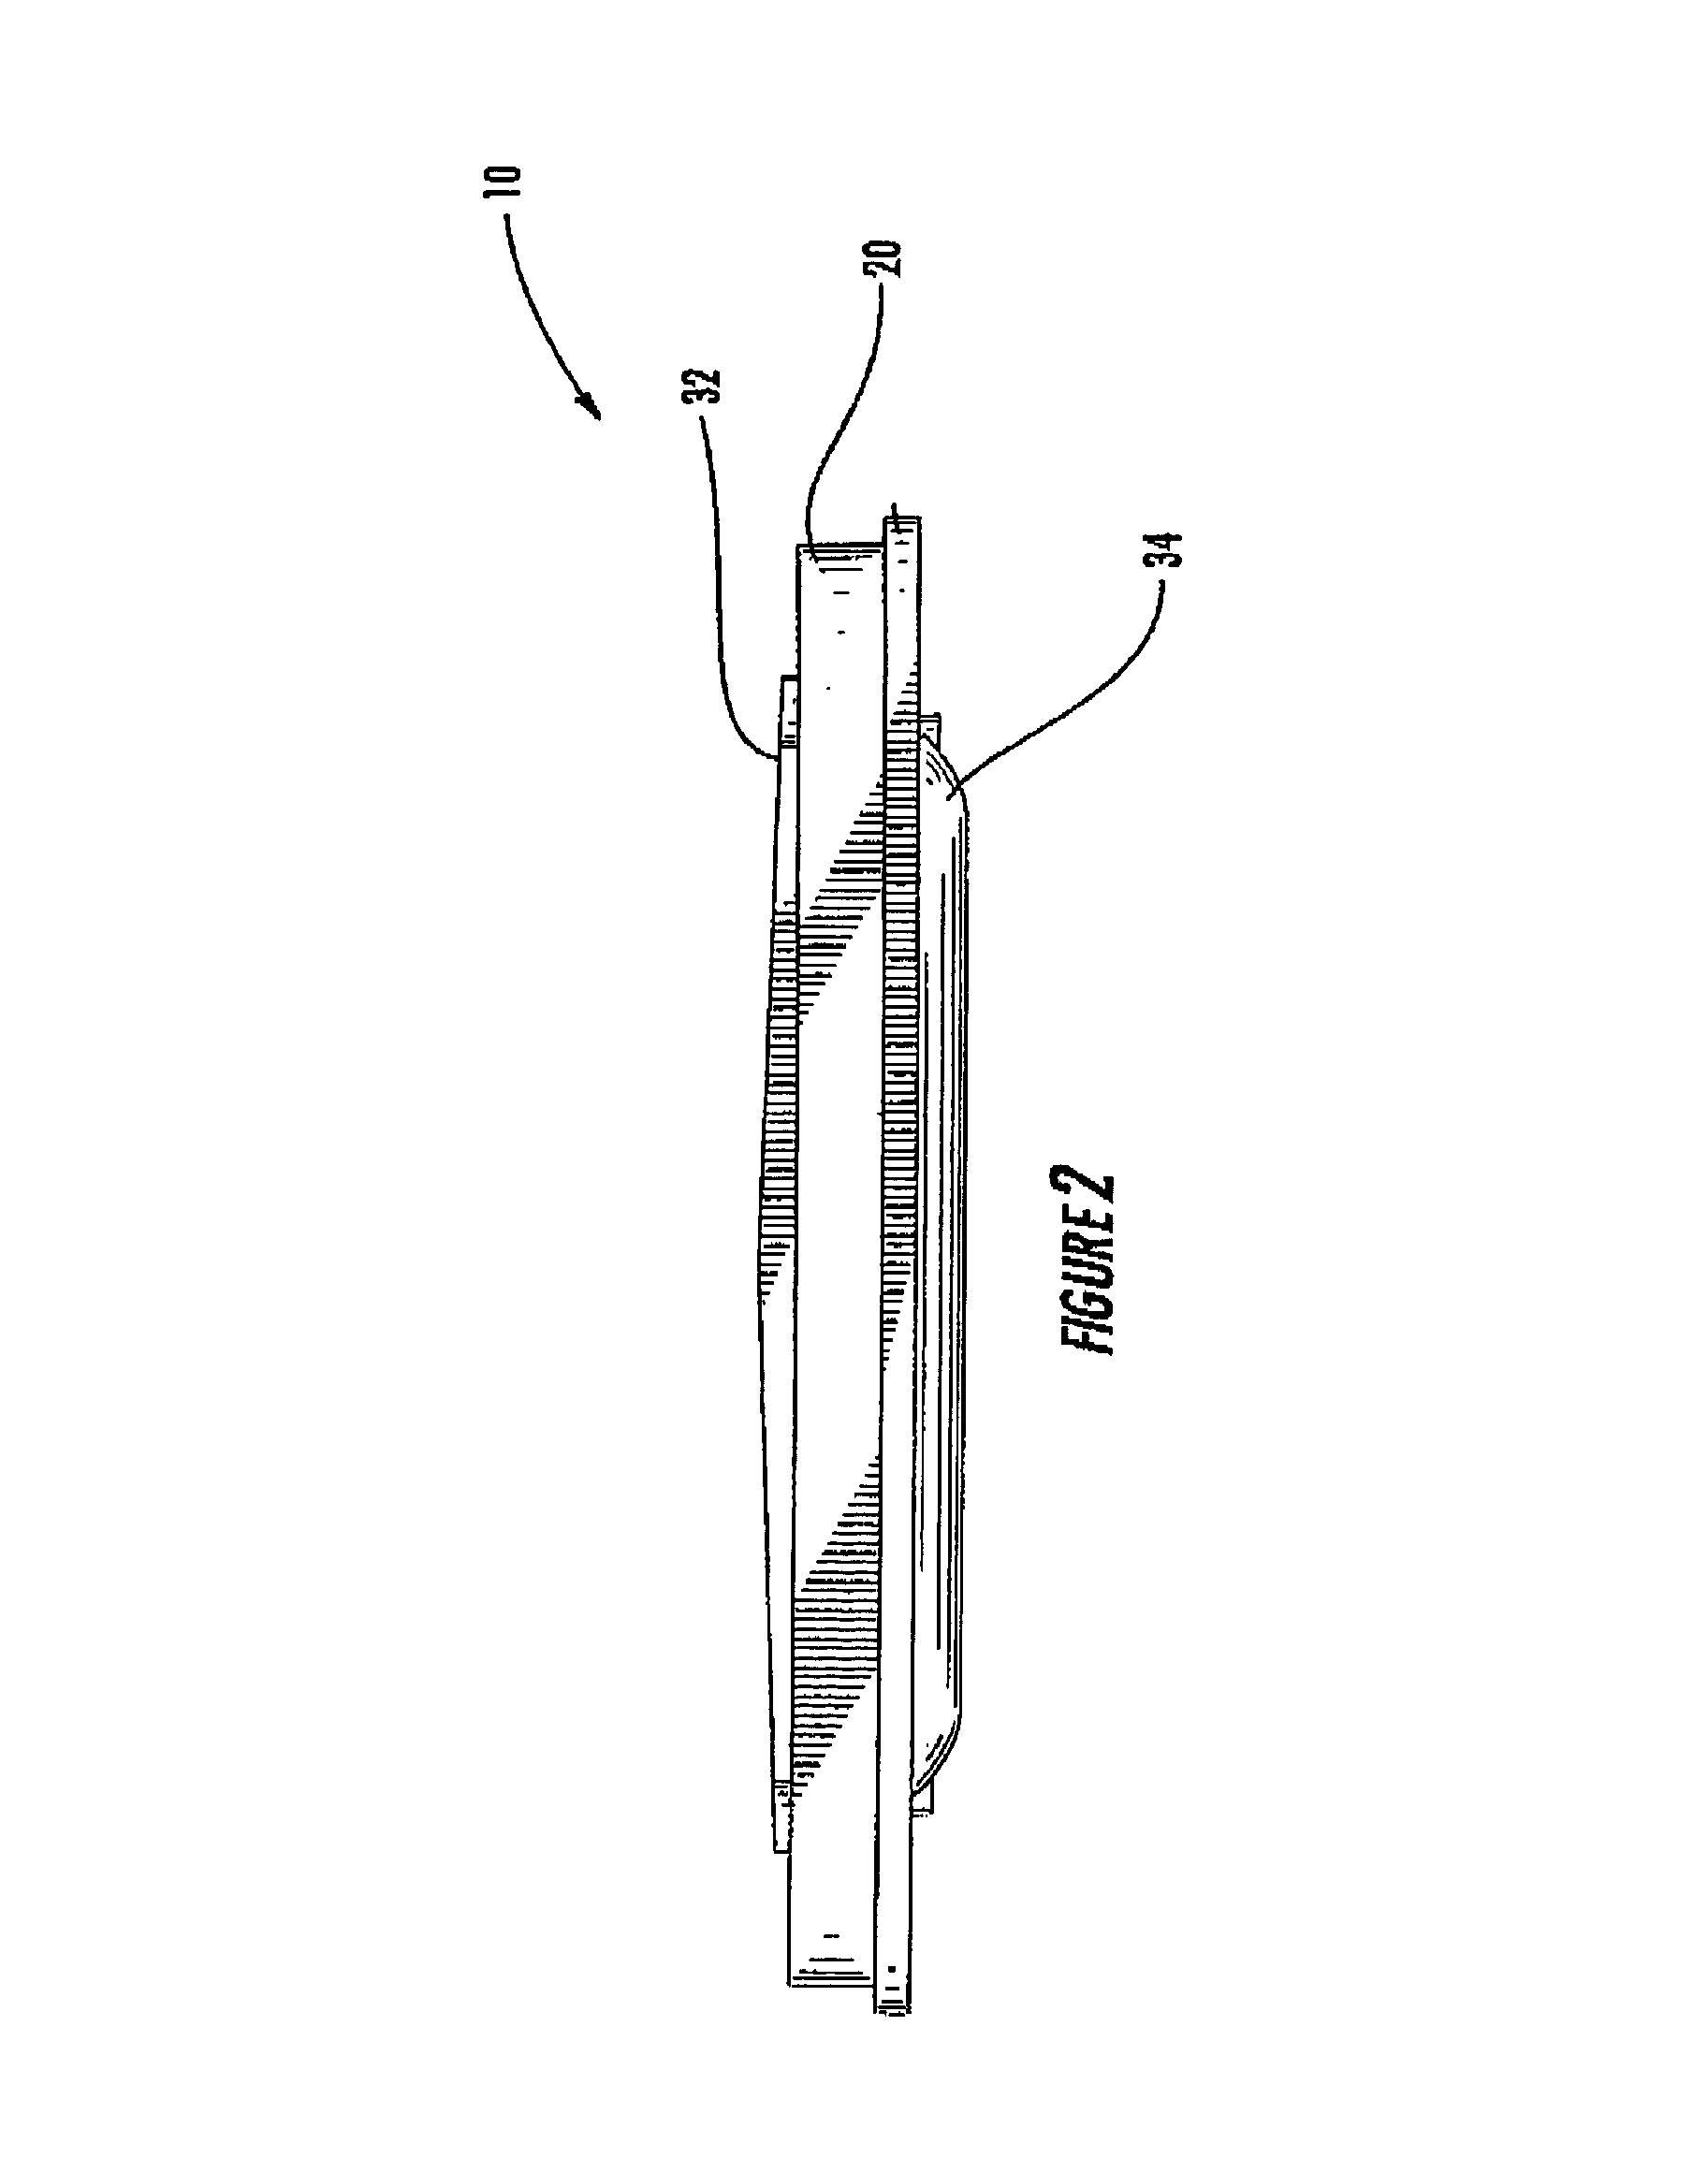 Thermally-conductive plastic articles having light reflecting surfaces